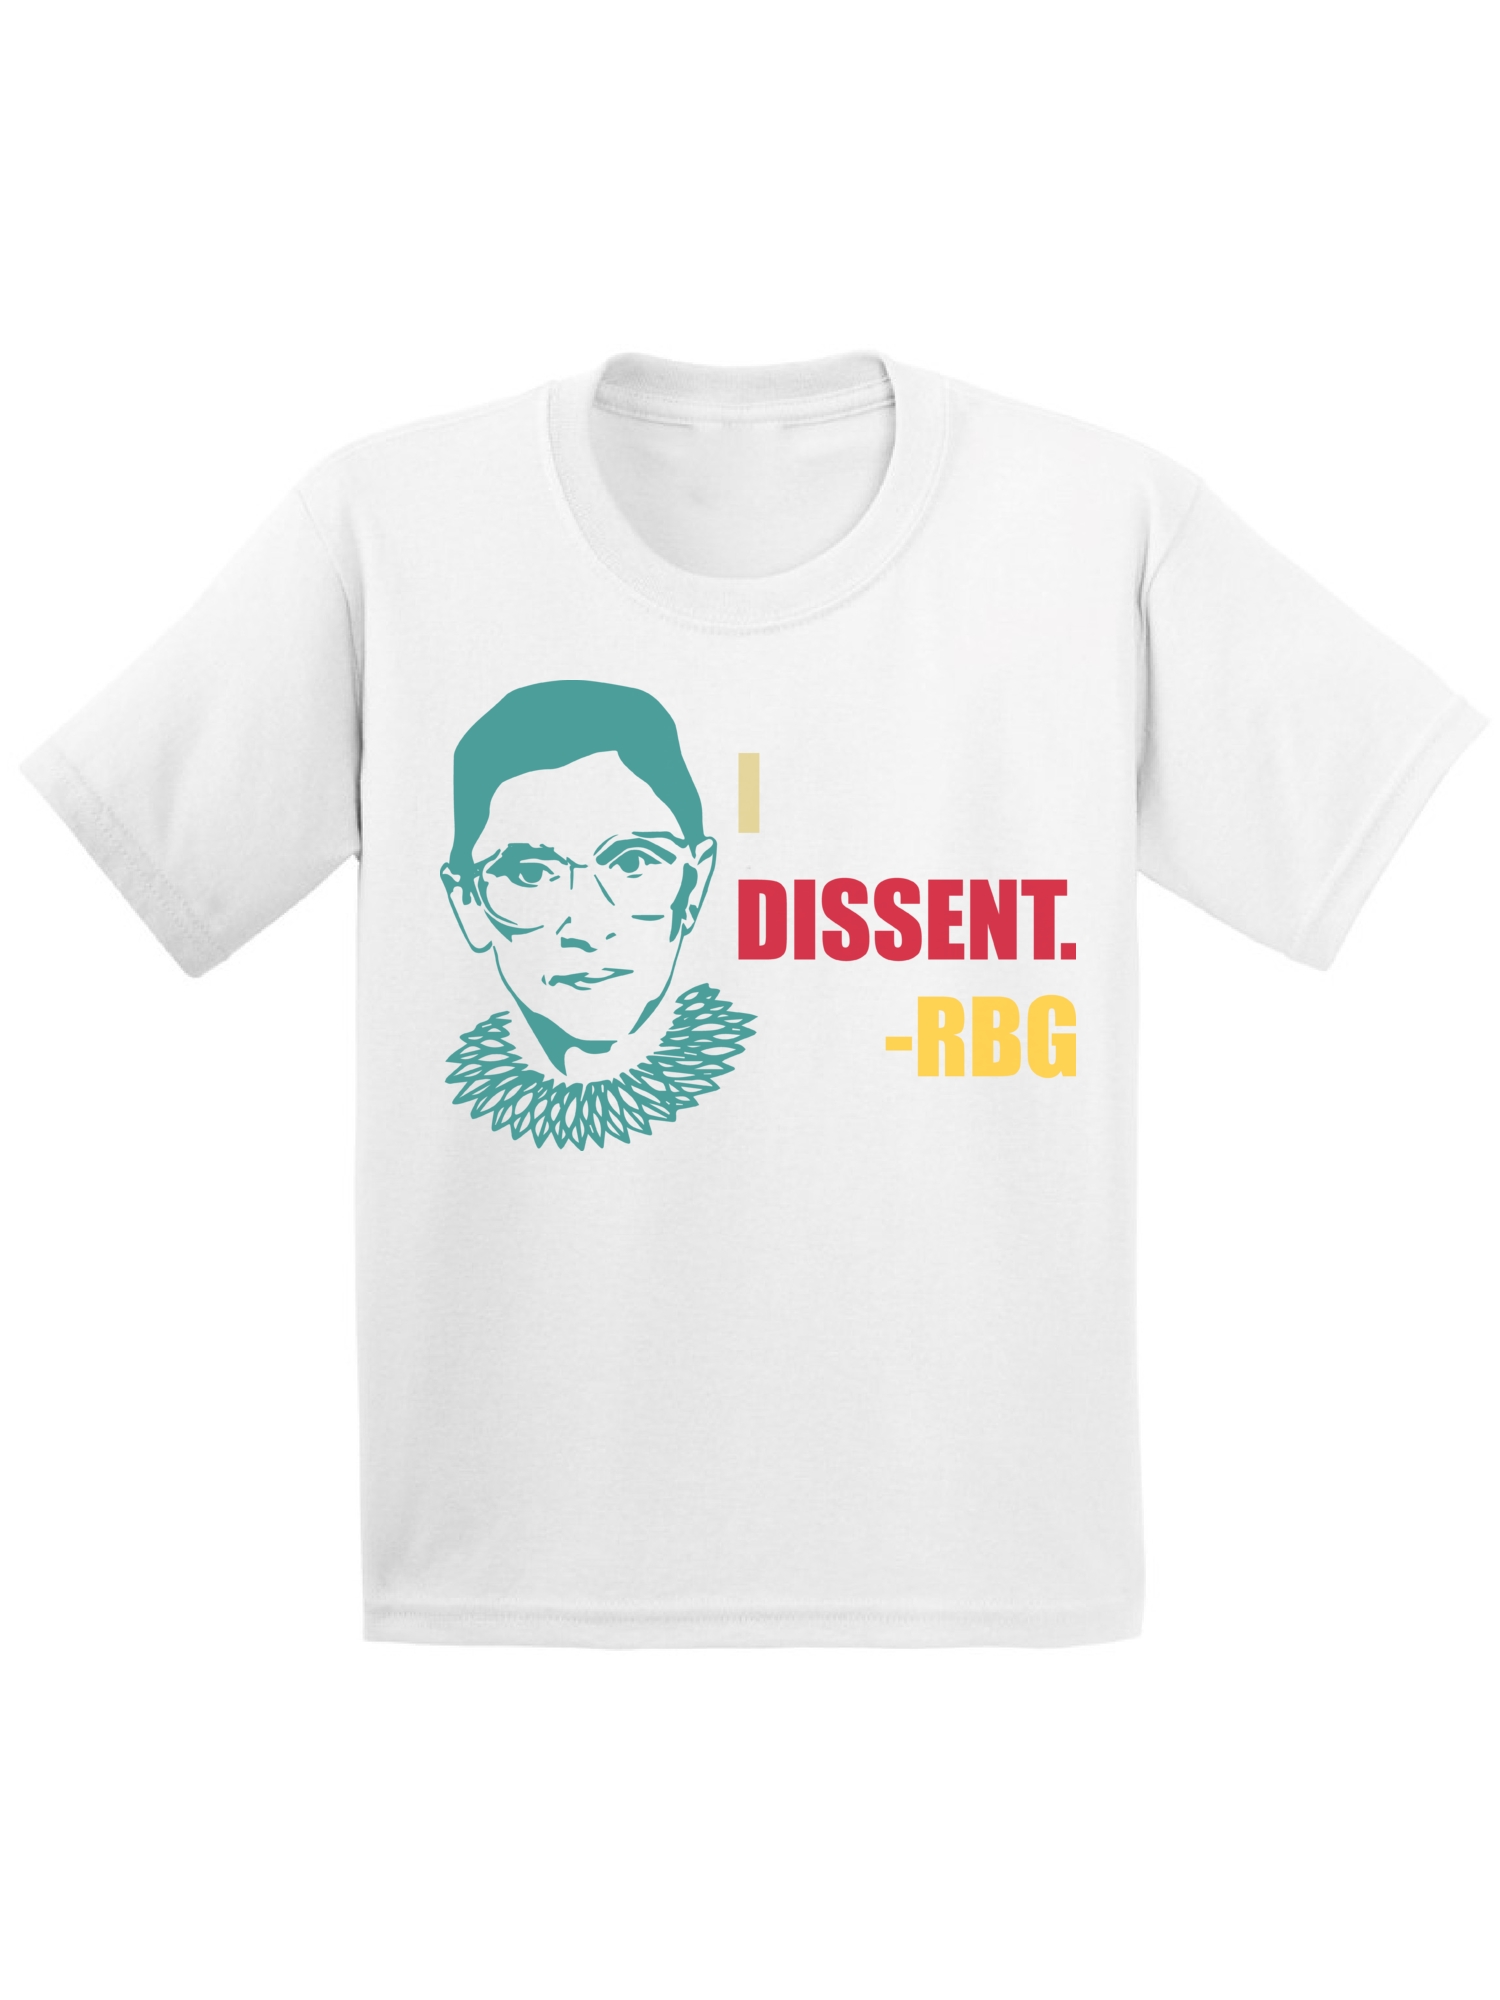 Awkward Styles Ruth Bader Ginsburg Shirt for Kids Dissent RBG Notorious Shirt RBG T Shirt Youth Support Women Empowerment Youth T-shirt - image 1 of 4